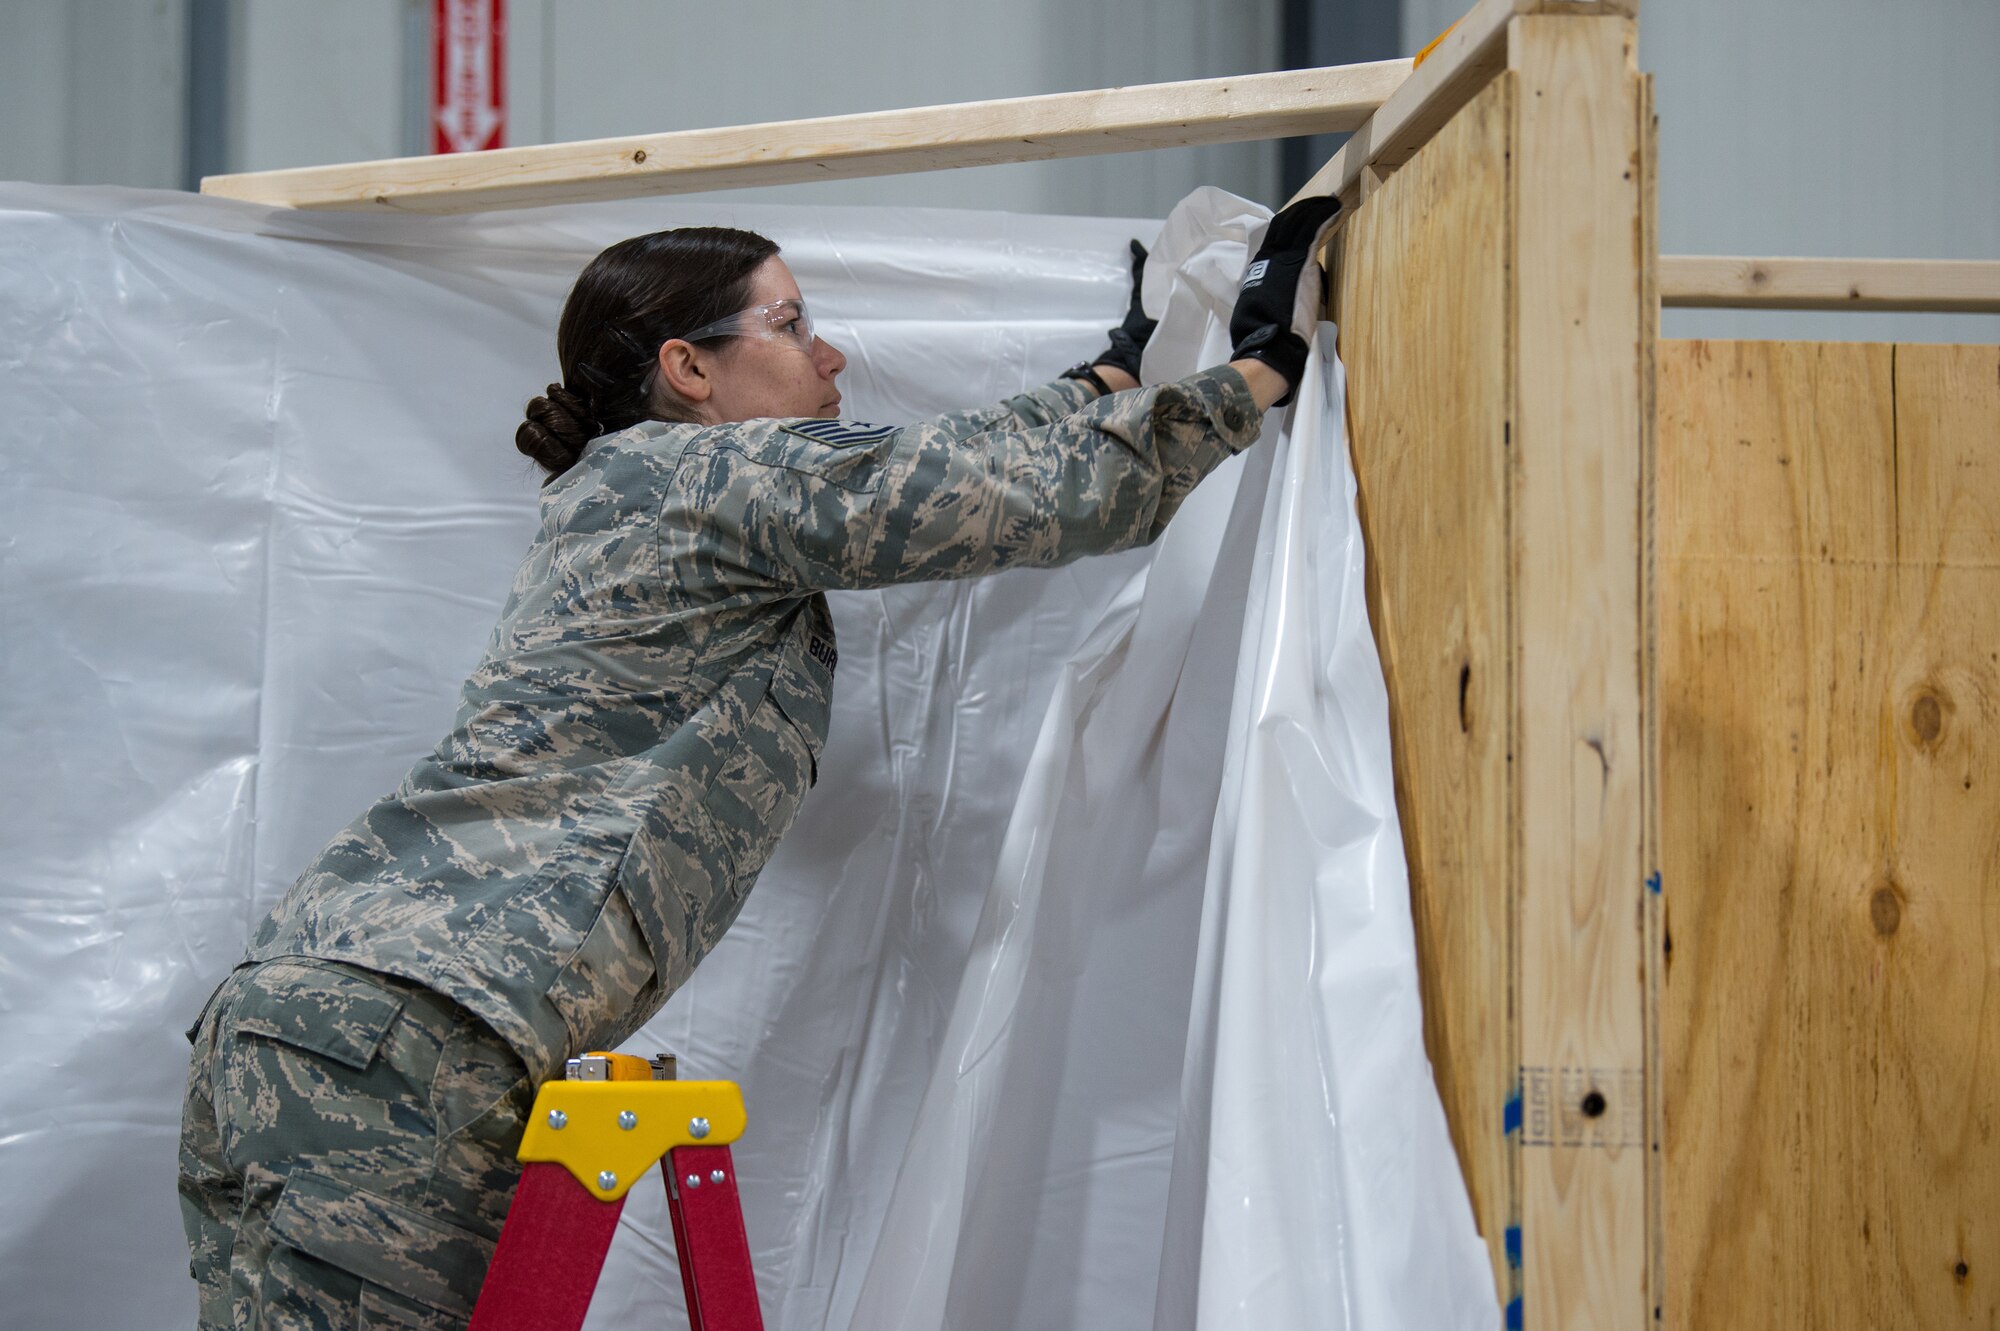 An Airman assigned to the 158th Fighter Wing, Vermont Air National Guard, works to construct a 400-bed medical health facility at the Champlain Valley Exposition